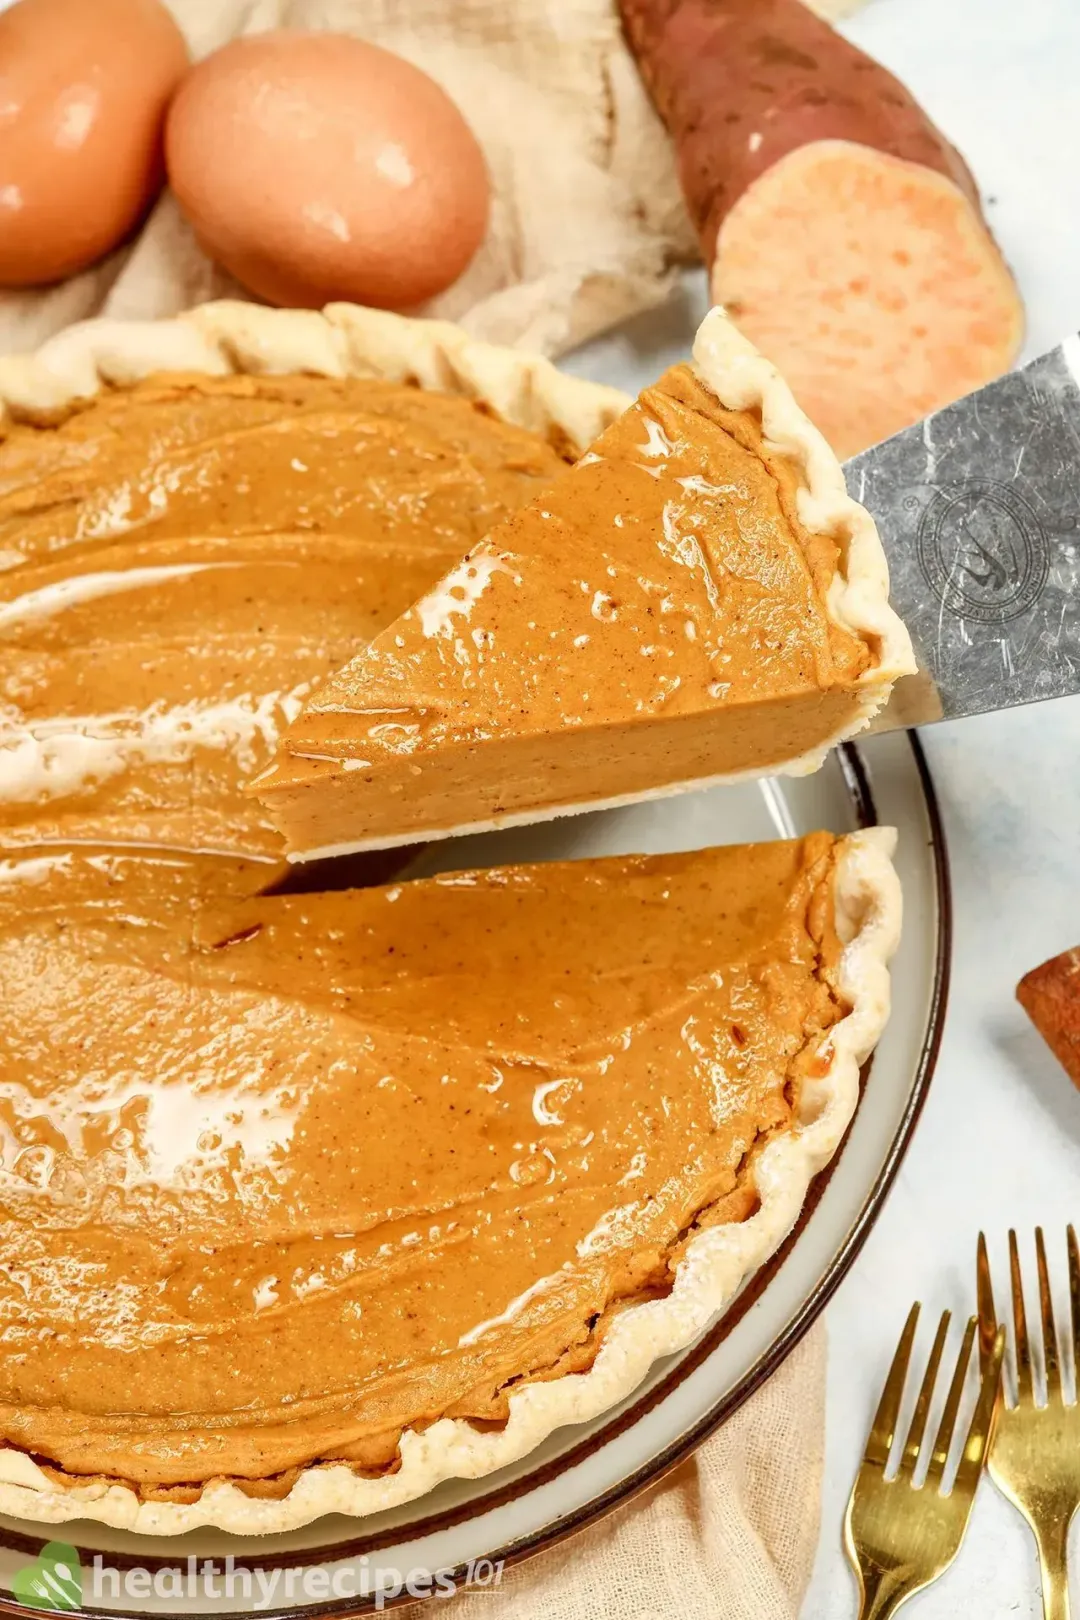 A slice of sweet potato pie being taken from a whole pie with a cake spatula